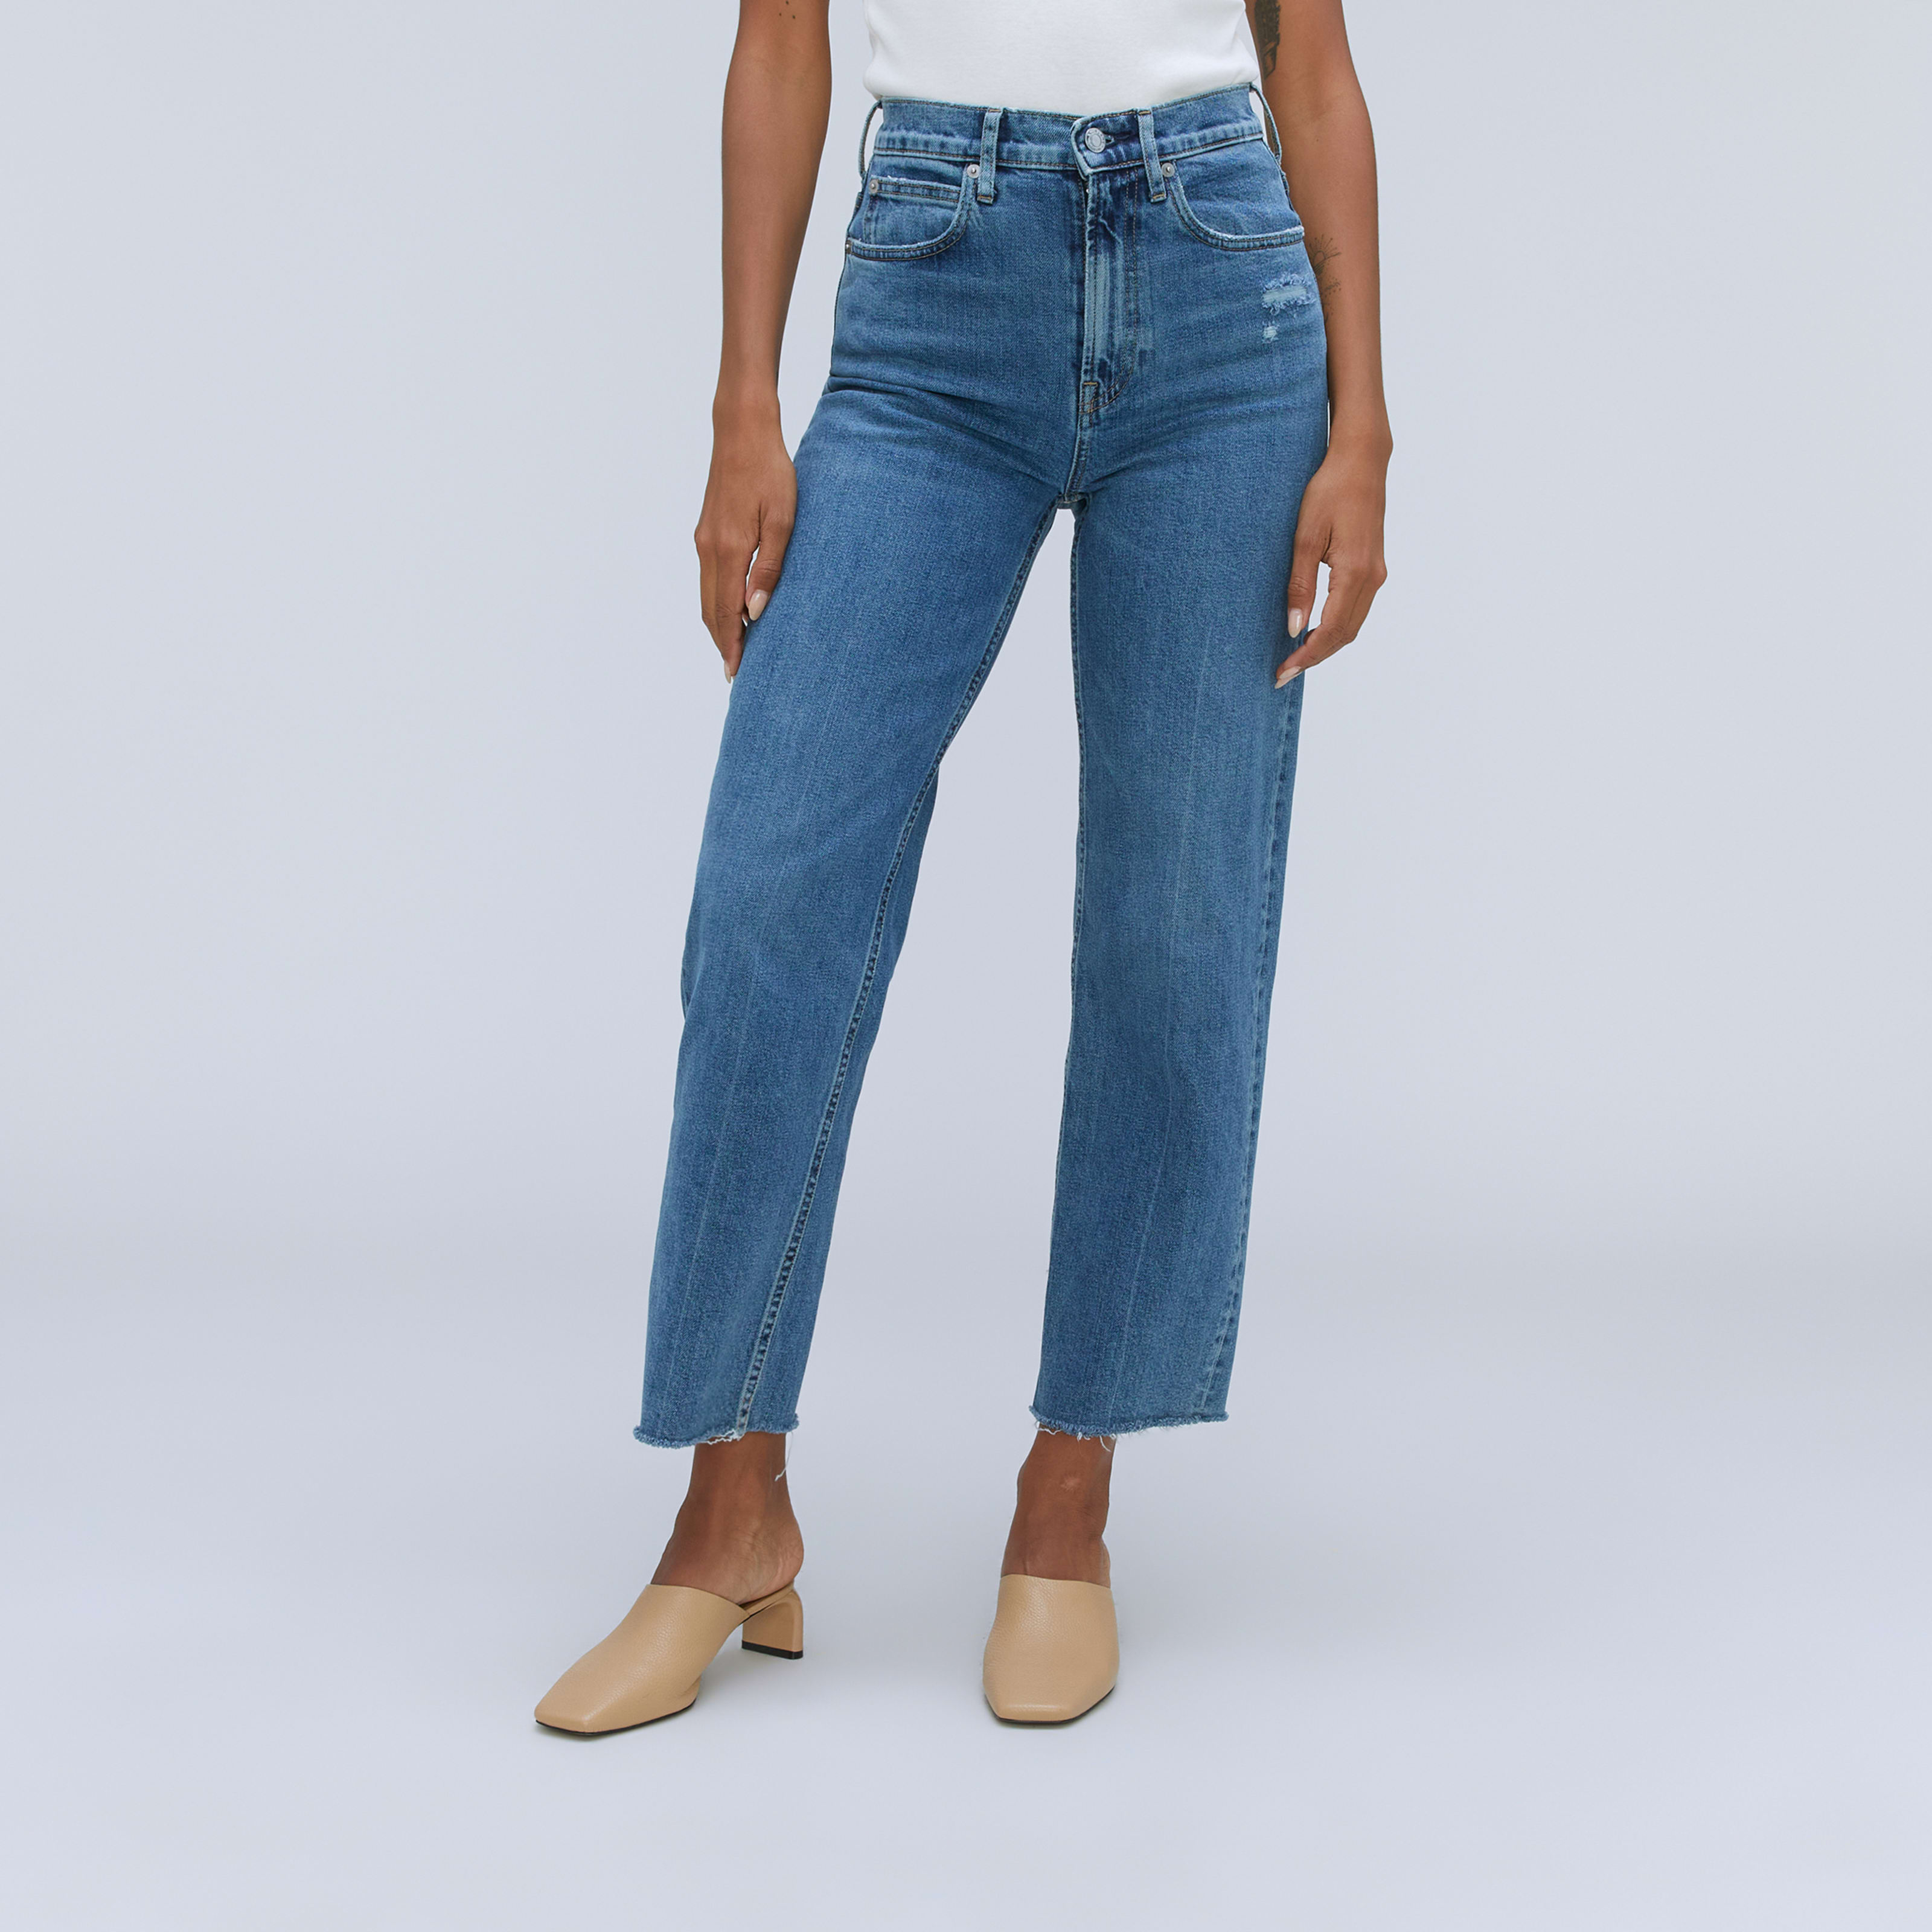 women's way-highâ® jean by everlane in distressed, size 33